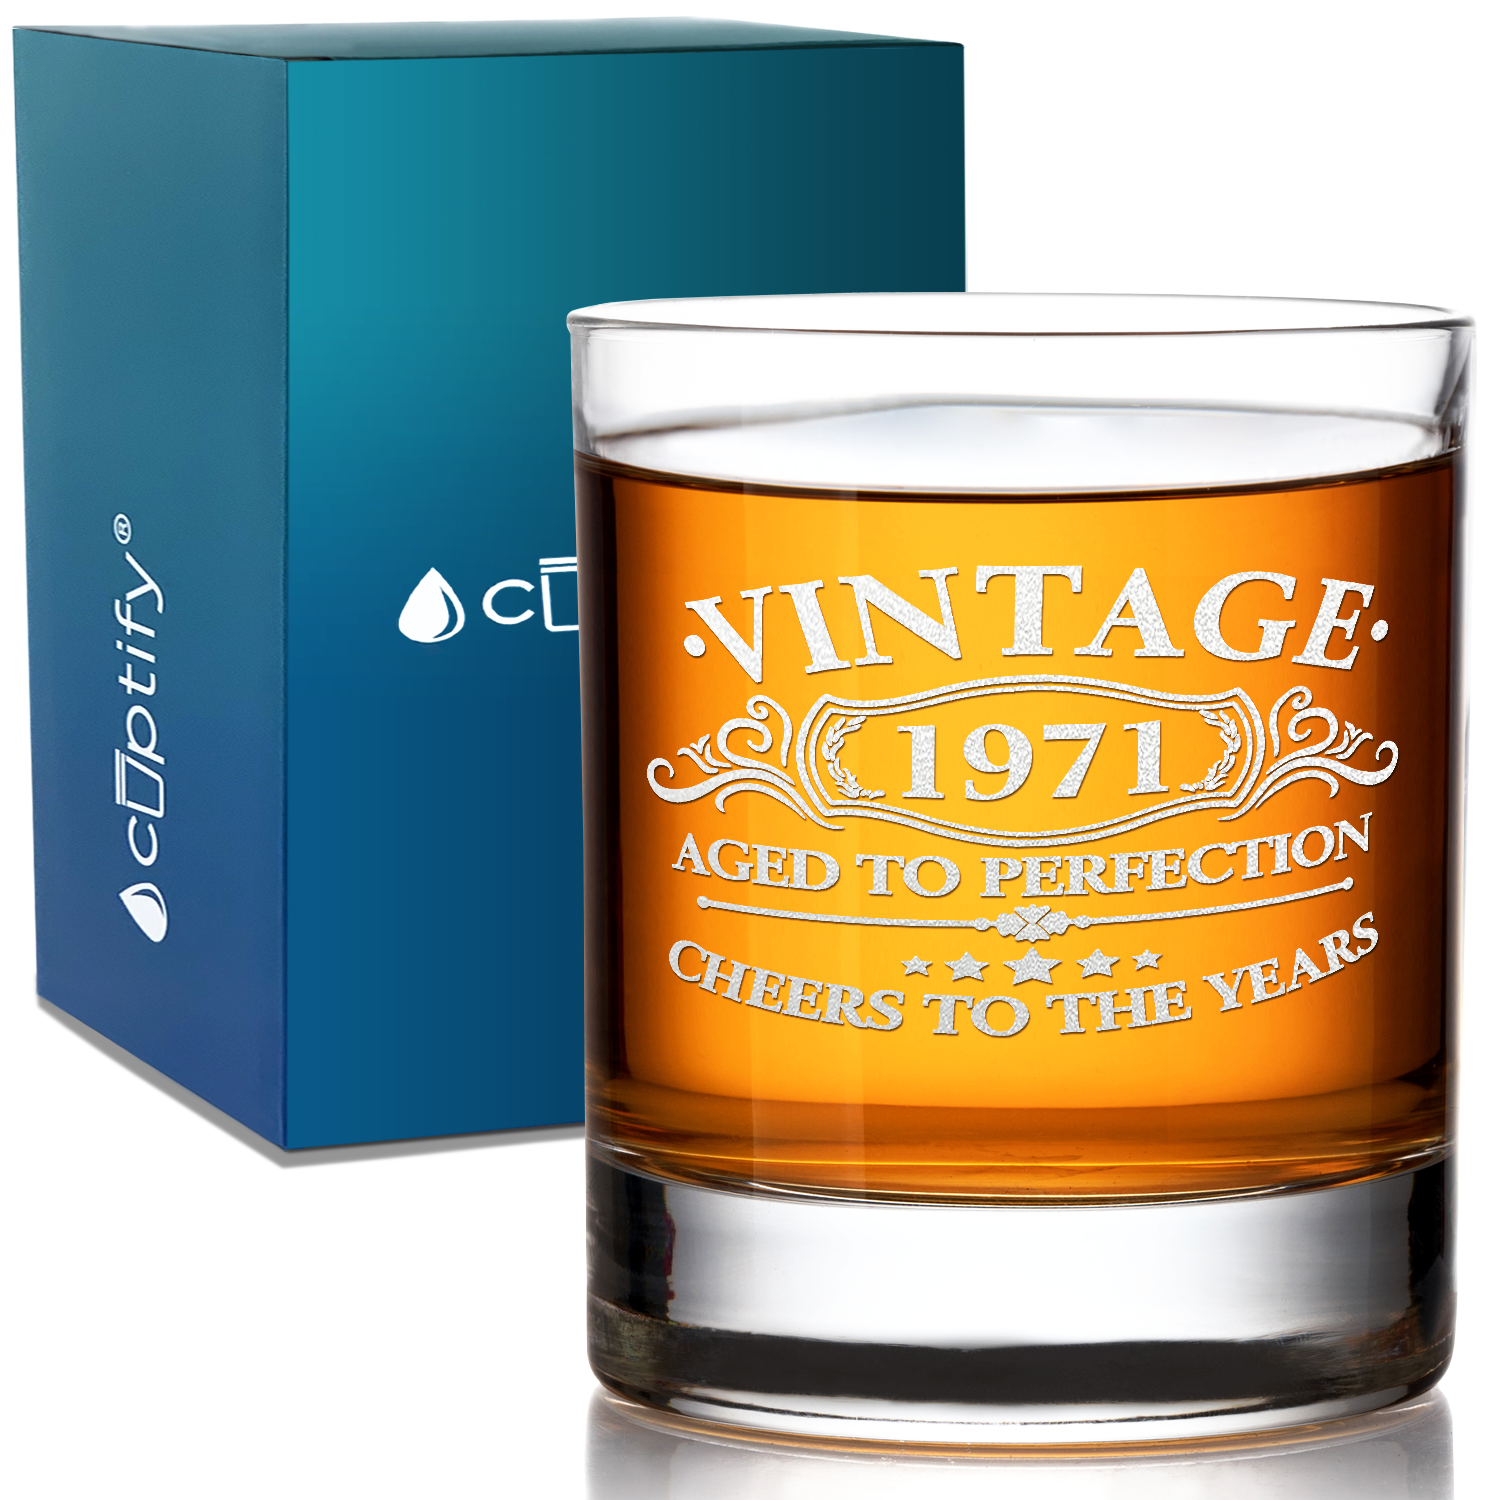 Vintage Aged To Perfection Cheers To 50 Years 1971 Laser Engraved on 10.25oz Old Fashion Glass